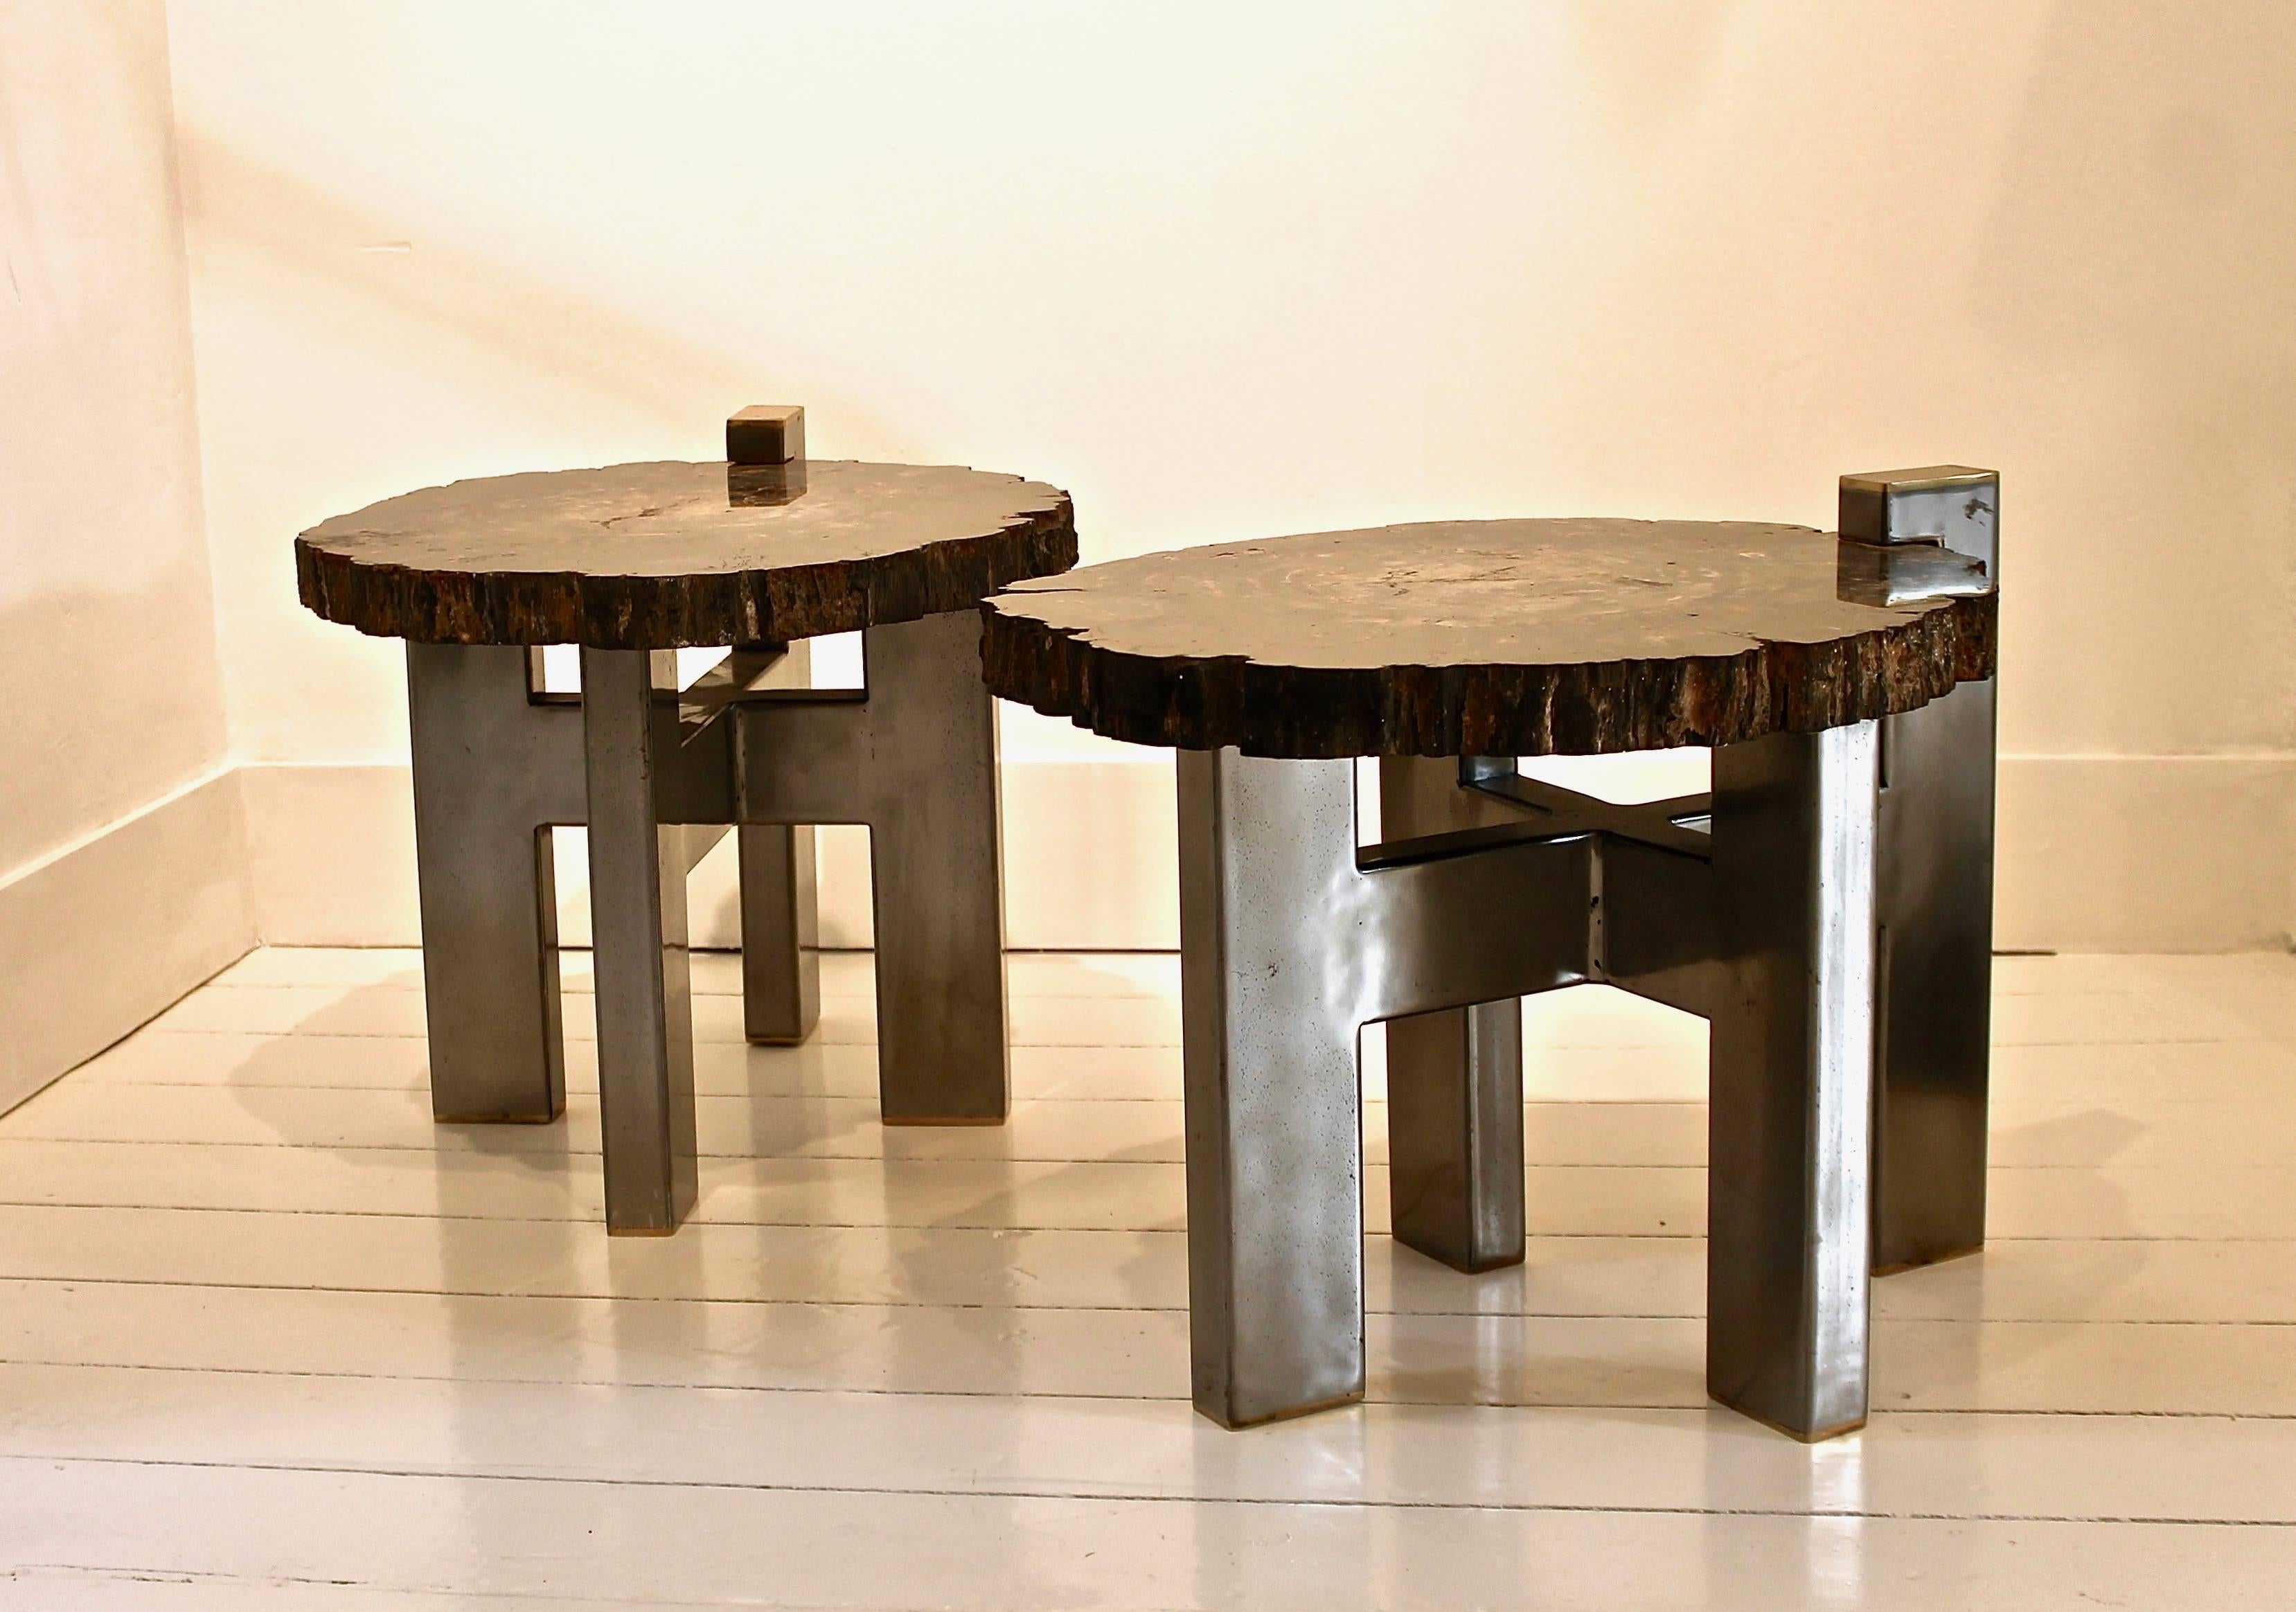 Organic Modern Pair of 1970s Inspired Side Tables in Petrified Wood by Artist Yann Dessauvages